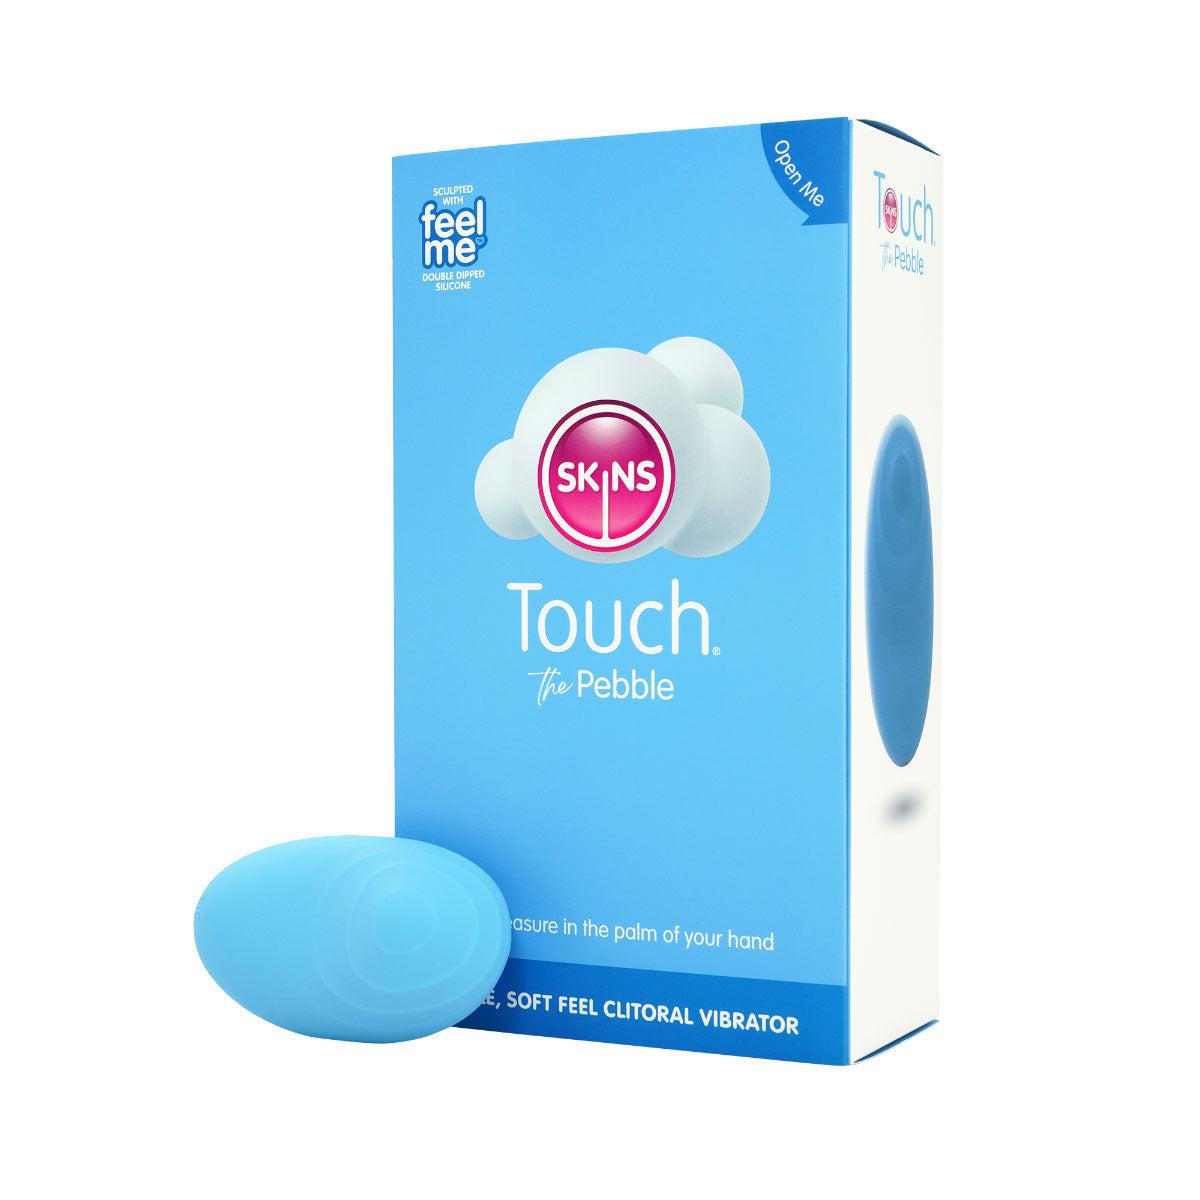 Skins Touch - the Pebble - Blue